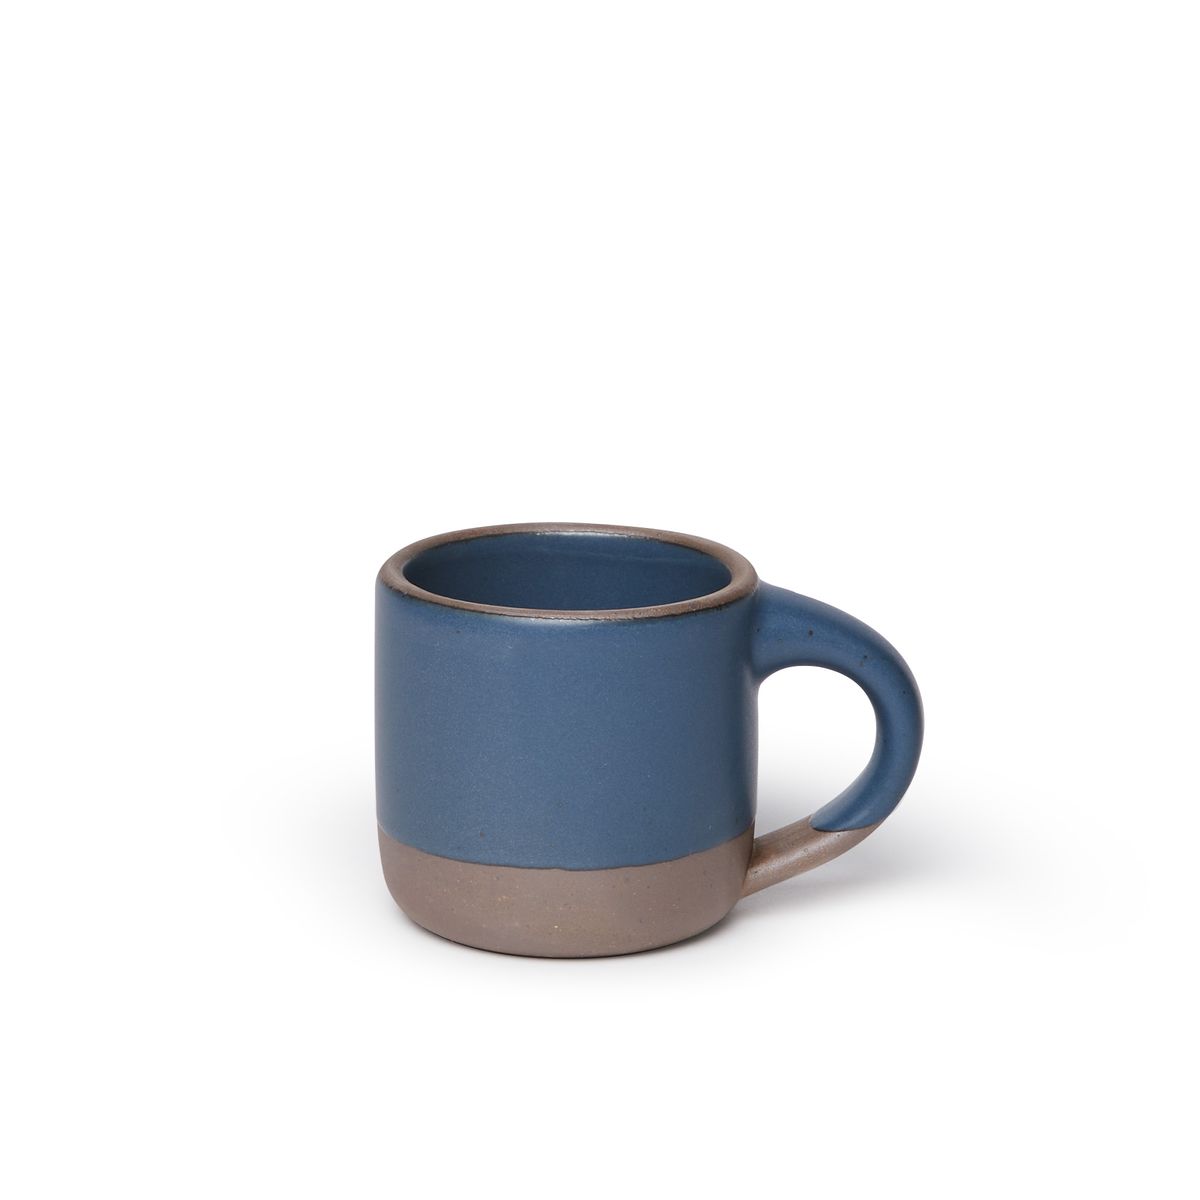 A small sized ceramic mug with handle in a toned-down navy glaze featuring iron speckles and unglazed rim and bottom base.